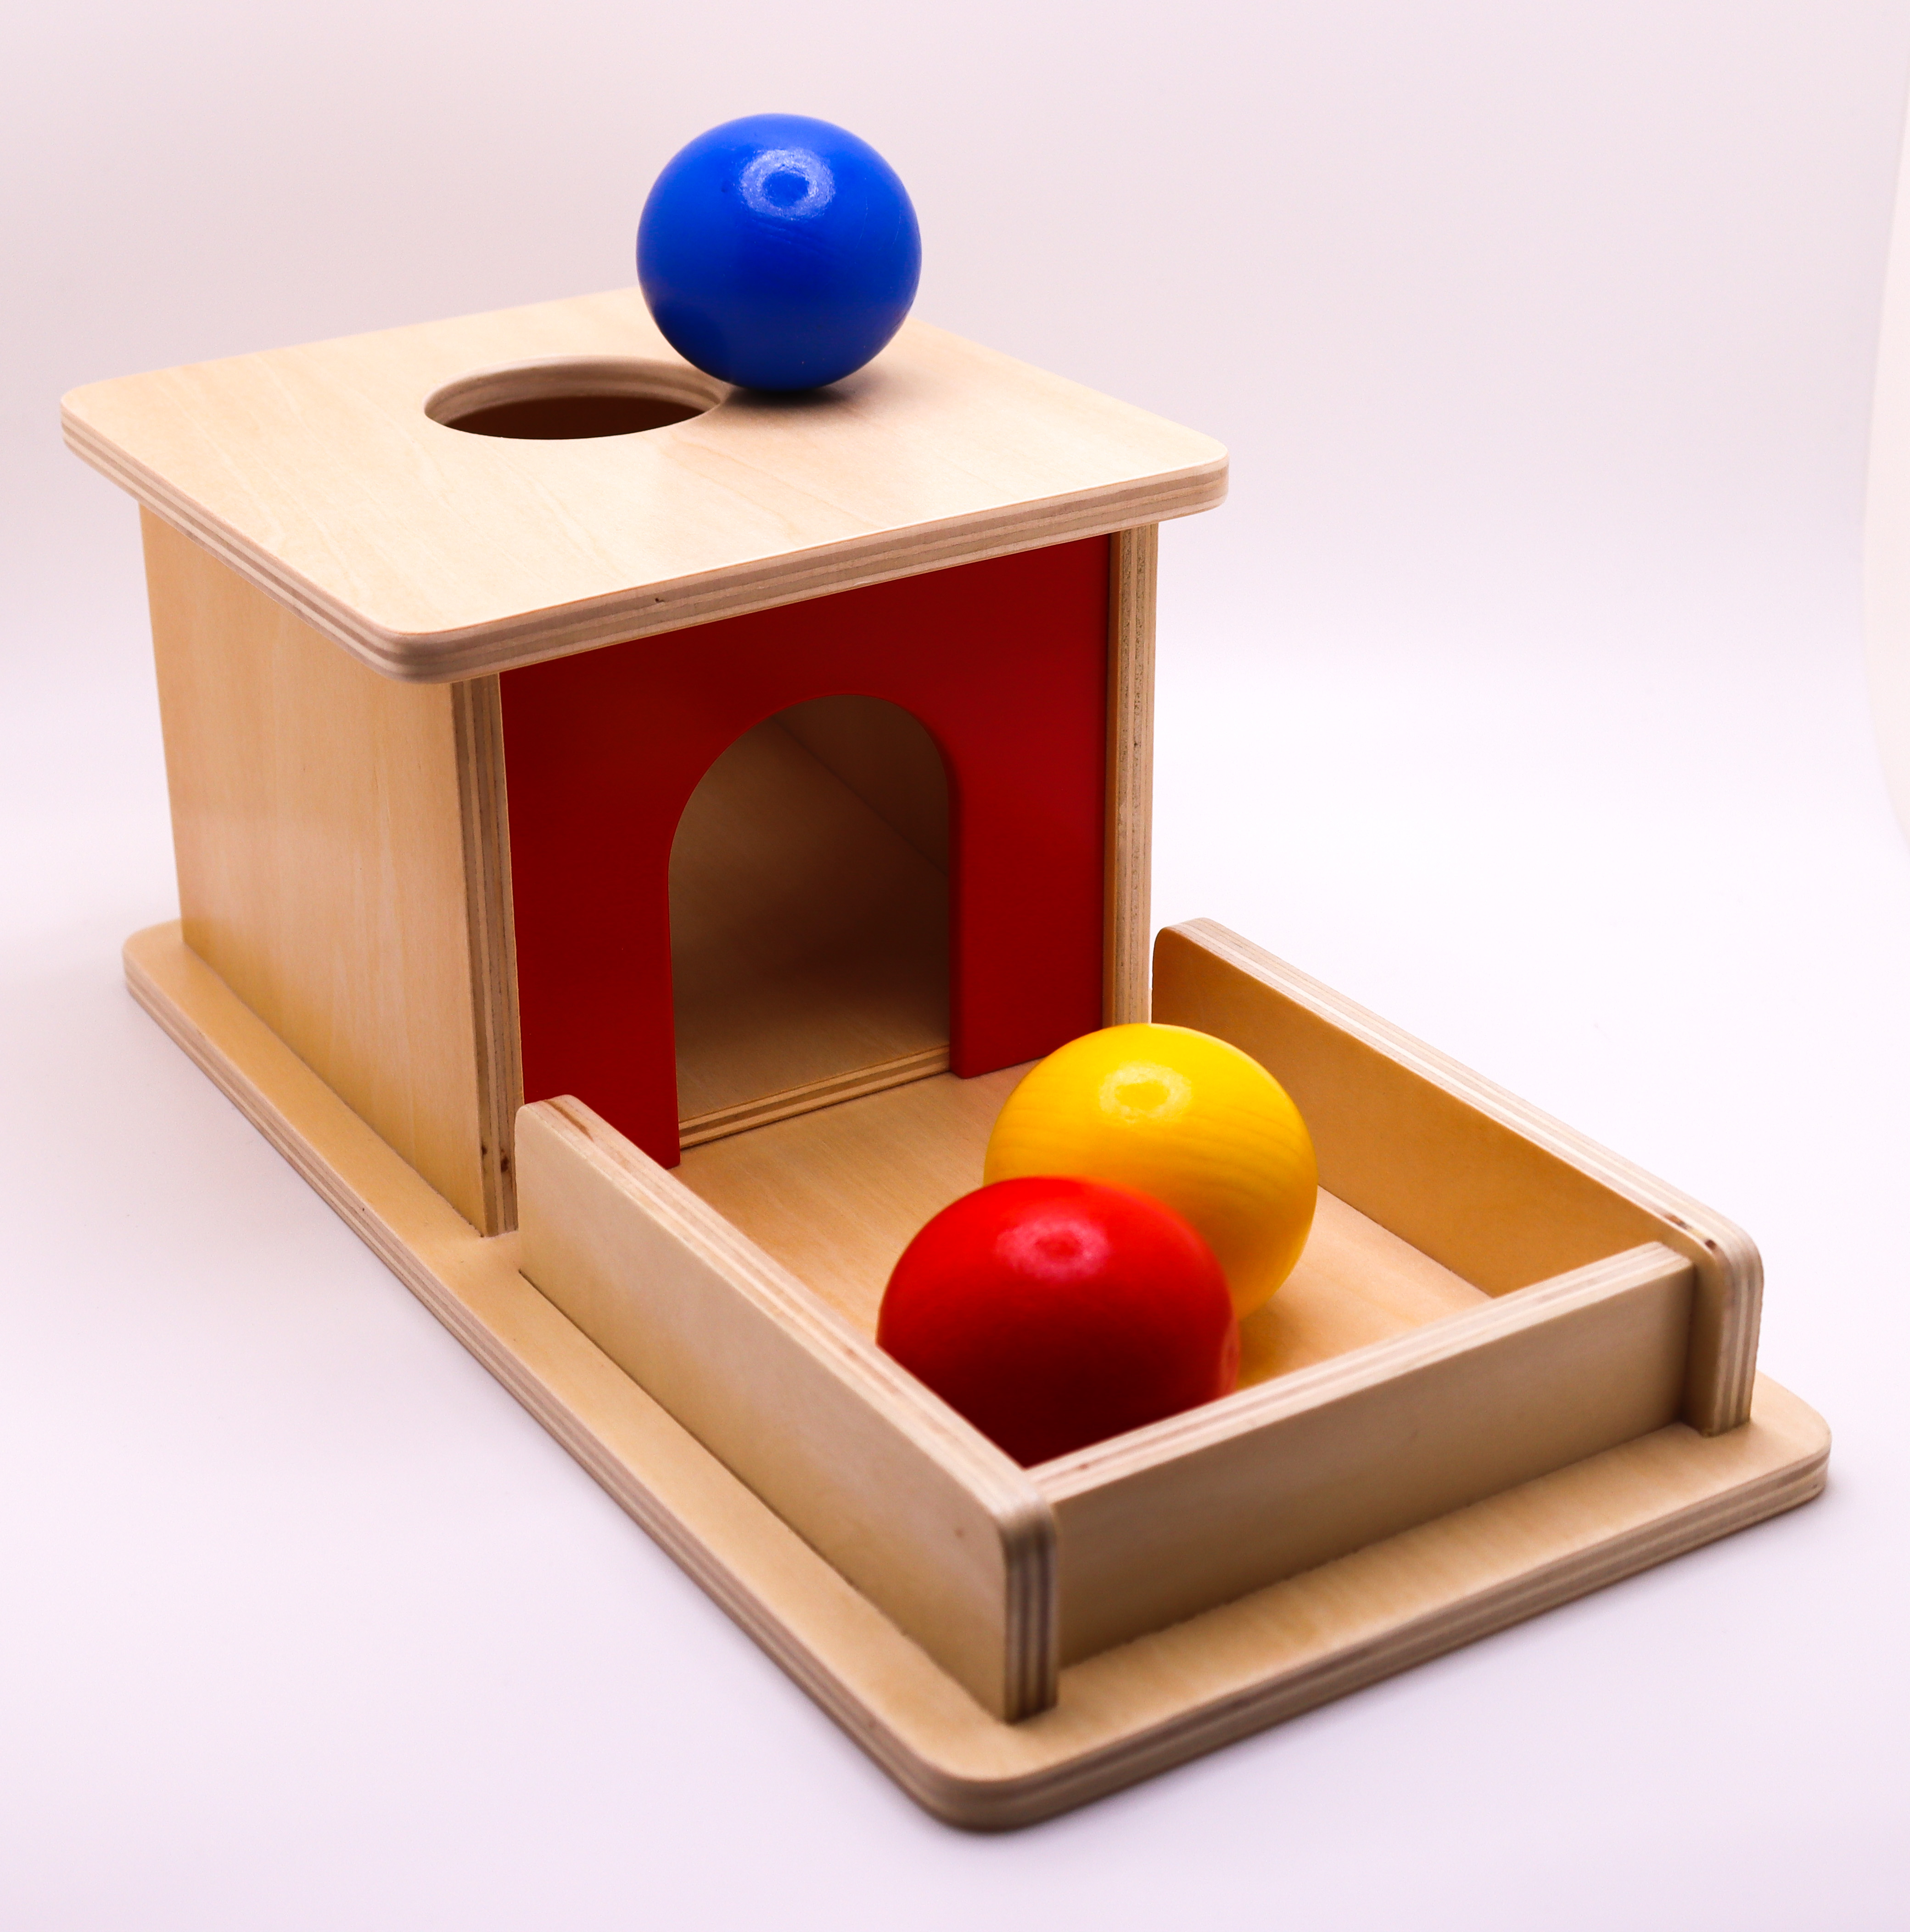 Ball drop and roll box